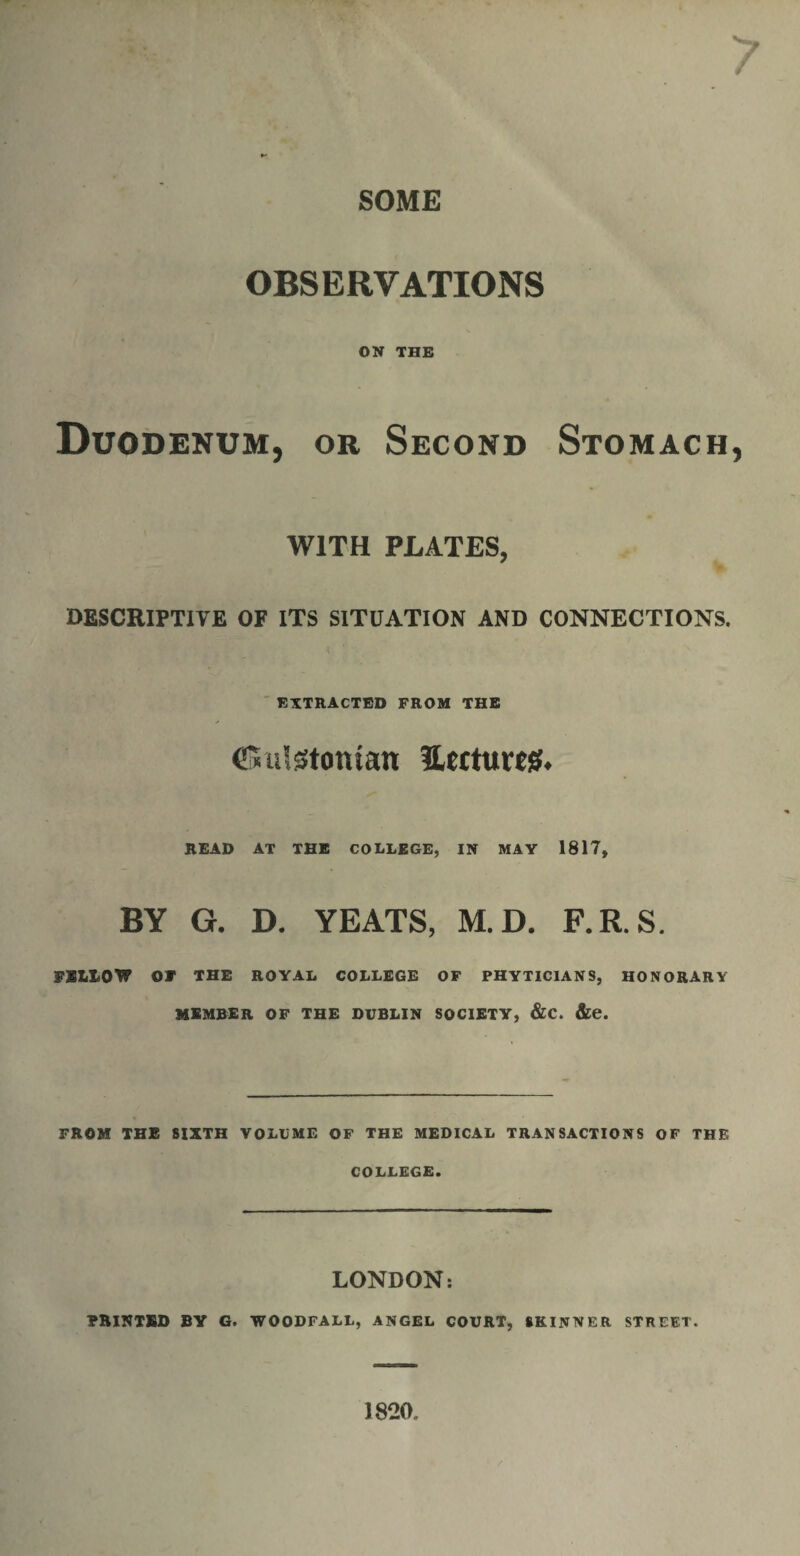 SOME OBSERVATIONS ON THE Duodenum, or Second Stomach WITH PLATES, DESCRIPTIVE OF ITS SITUATION AND CONNECTIONS. EXTRACTED FROM THE CSutetomatt ILtttum* READ AT THE COLLEGE, IN MAY 1817, BY G. D. YEATS, M.D. F.R.S. FBL10W OF THE ROYAL COLLEGE OF PHYTICIANS, HONORARY MEMBER OF THE DUBLIN SOCIETY, &C. &e. FROM THE SIXTH VOLUME OF THE MEDICAL TRANSACTIONS OF THE COLLEGE. LONDON: PRINTED BY G. WOODFALL, ANGEL COURT, SKINNER STREET. 1820